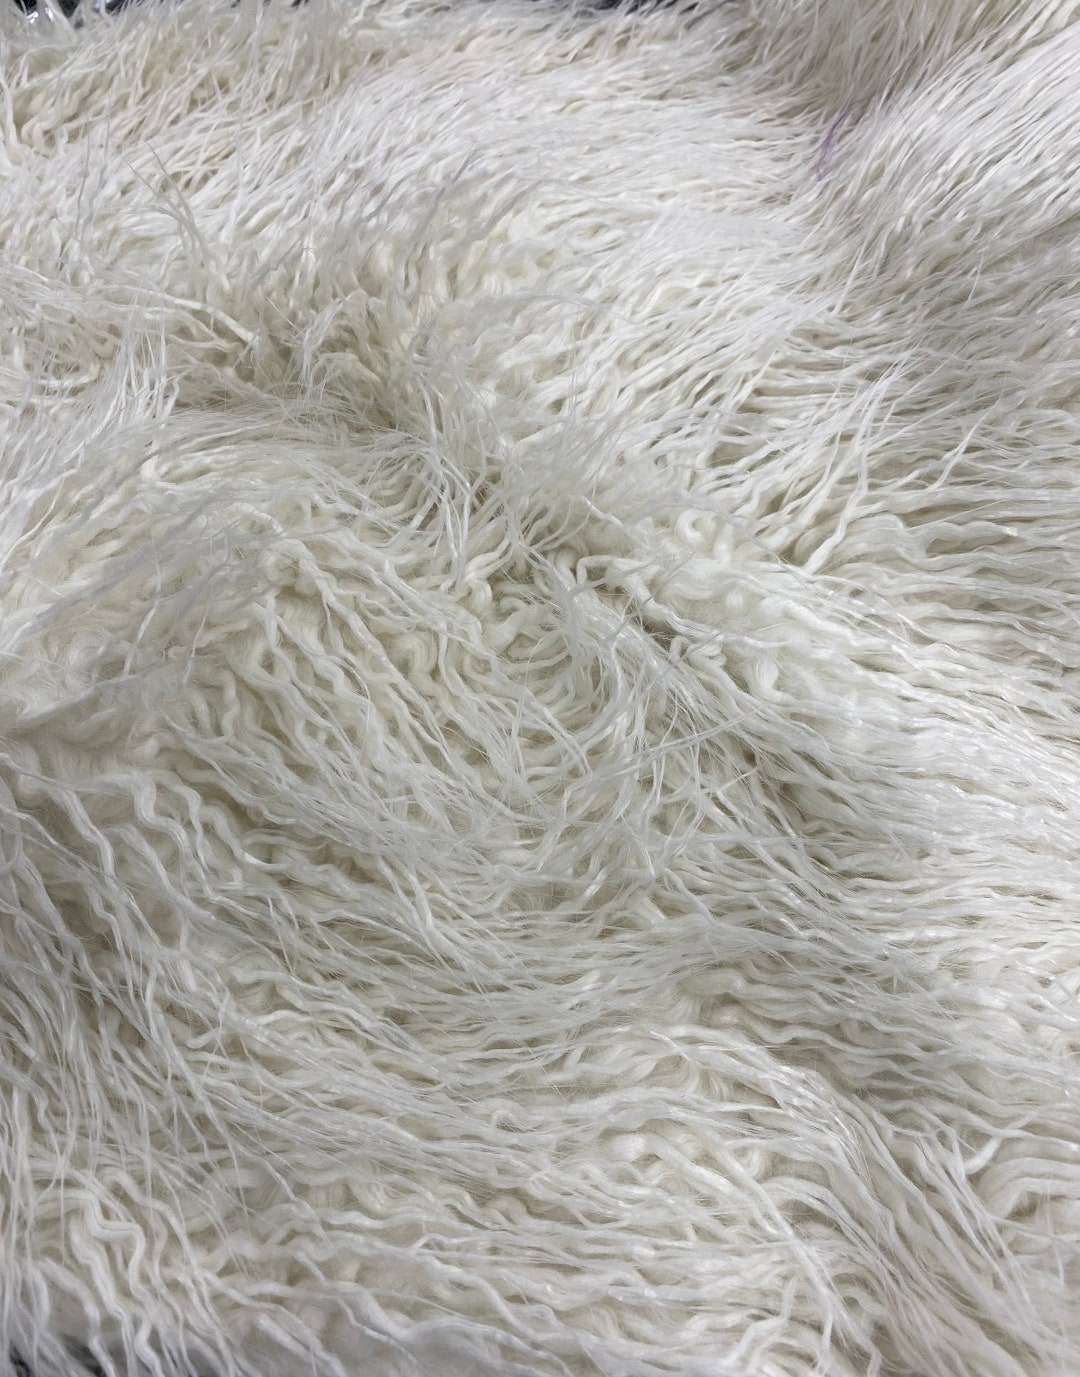 Mongolian Faux Fur Long Hair Pile Fabric BY THE YARD 60 Wide - Etsy